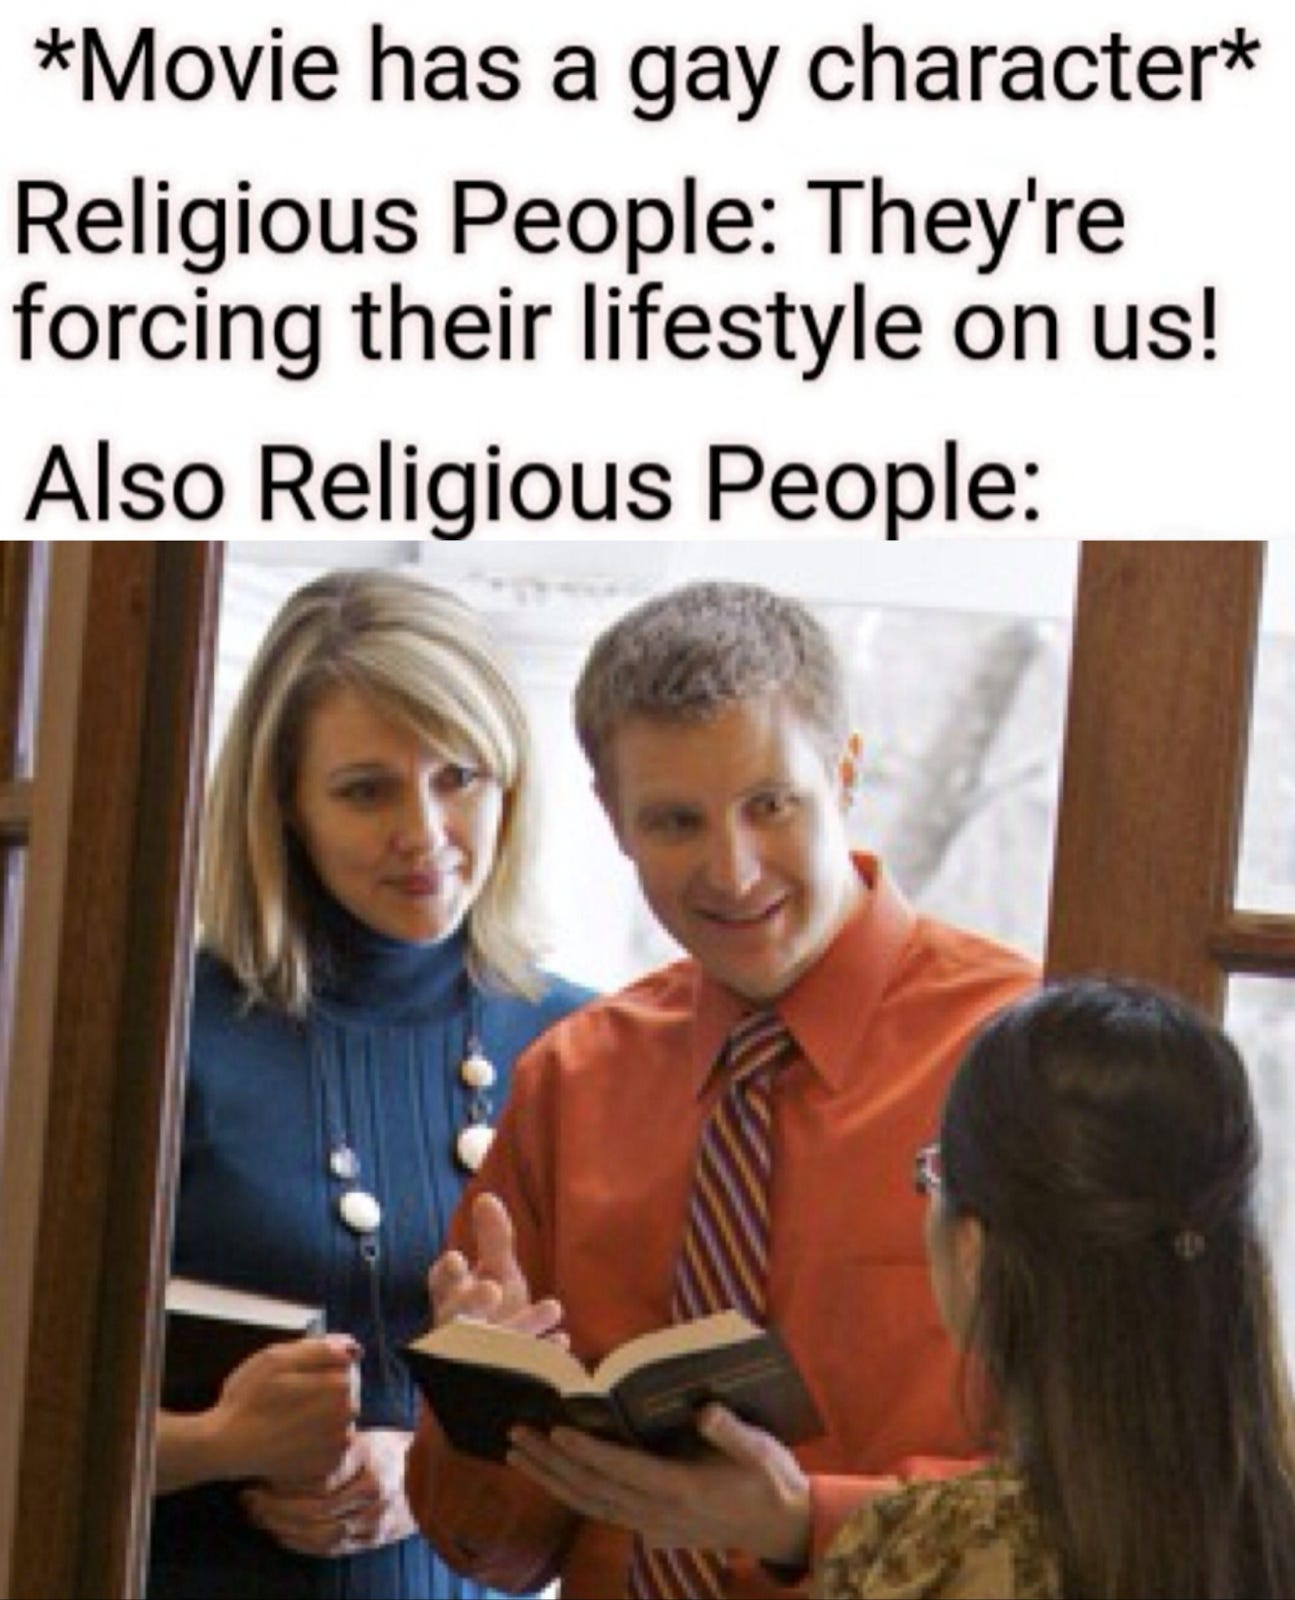 Missionaries prosletyzling at a door with caption pointing out the hyprocrisy of evangelicals that says LGBTQ people "force their lifestyle" on others